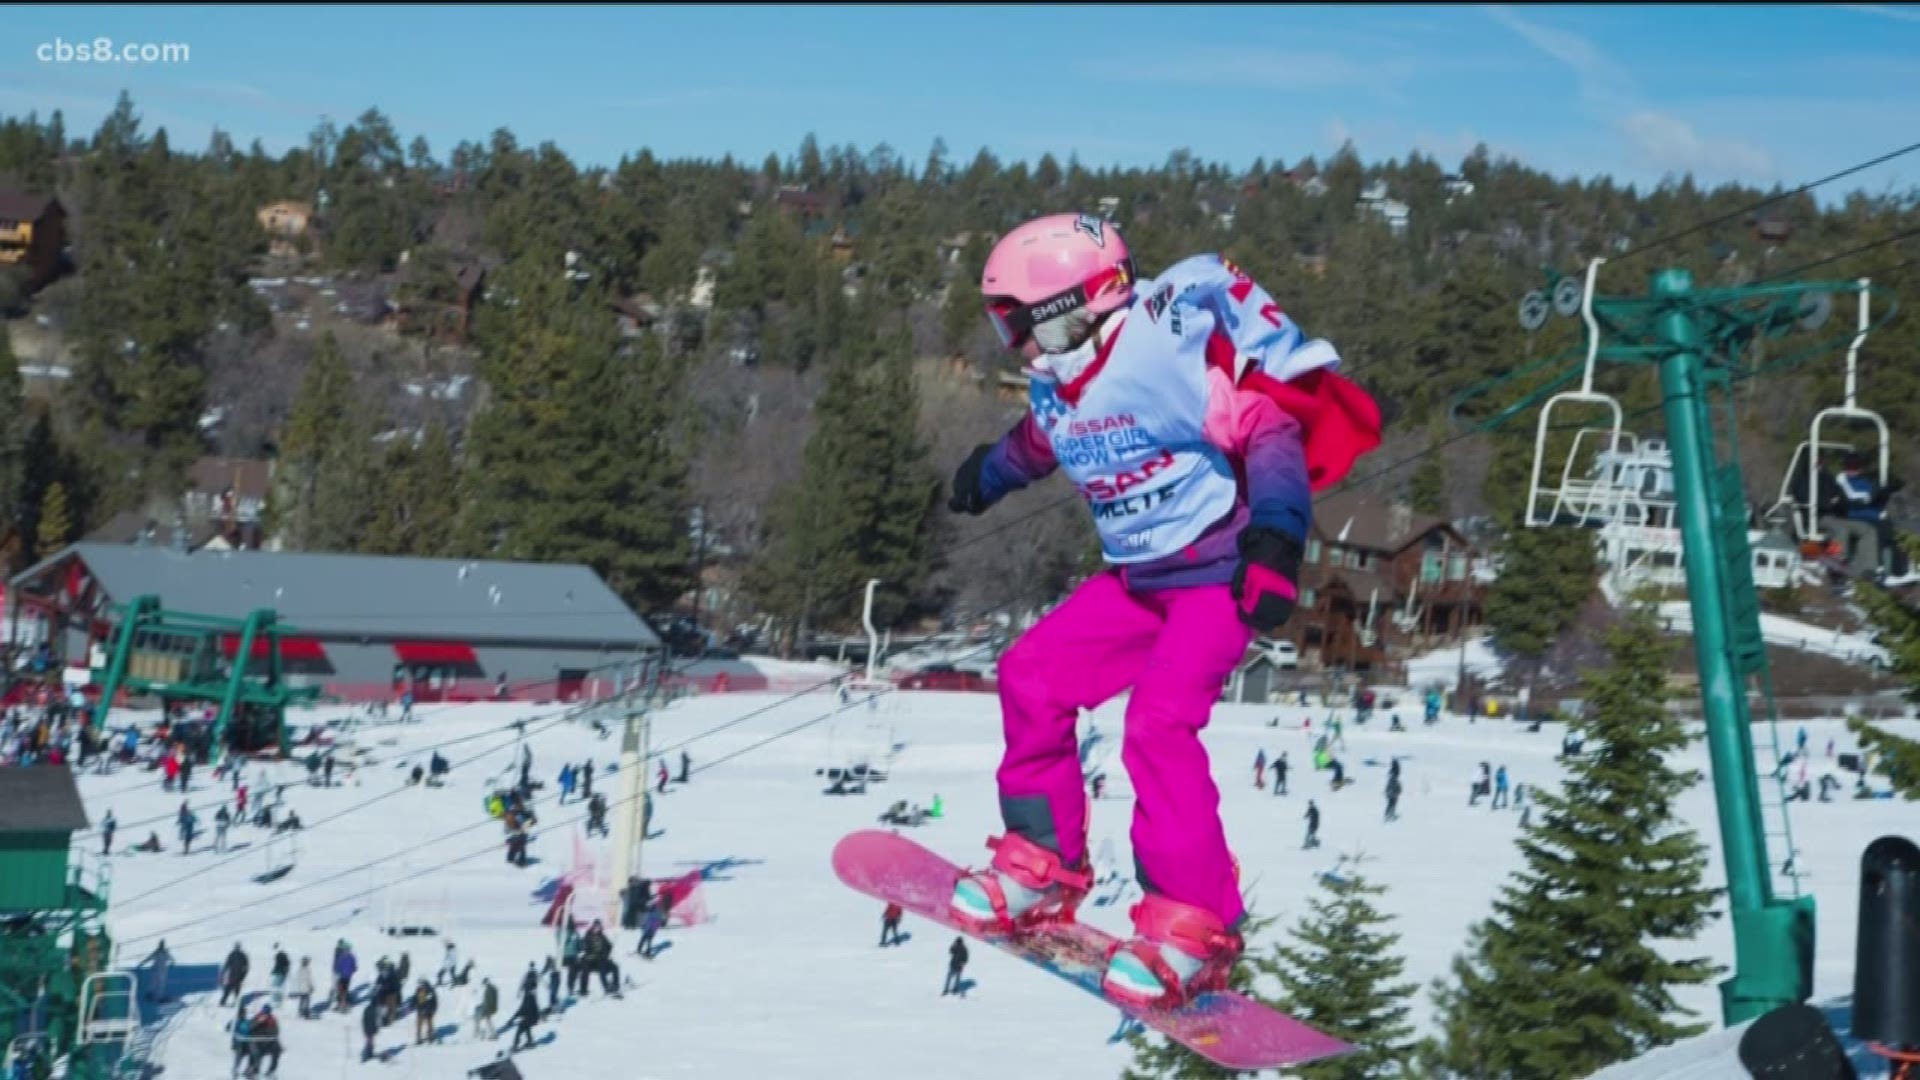 Four-time Olympian, Lindsey Jacobellis, is a member of the U.S. Snowboardcross Team and is the inspirational leader and mentor for Super Girl Snow Pro